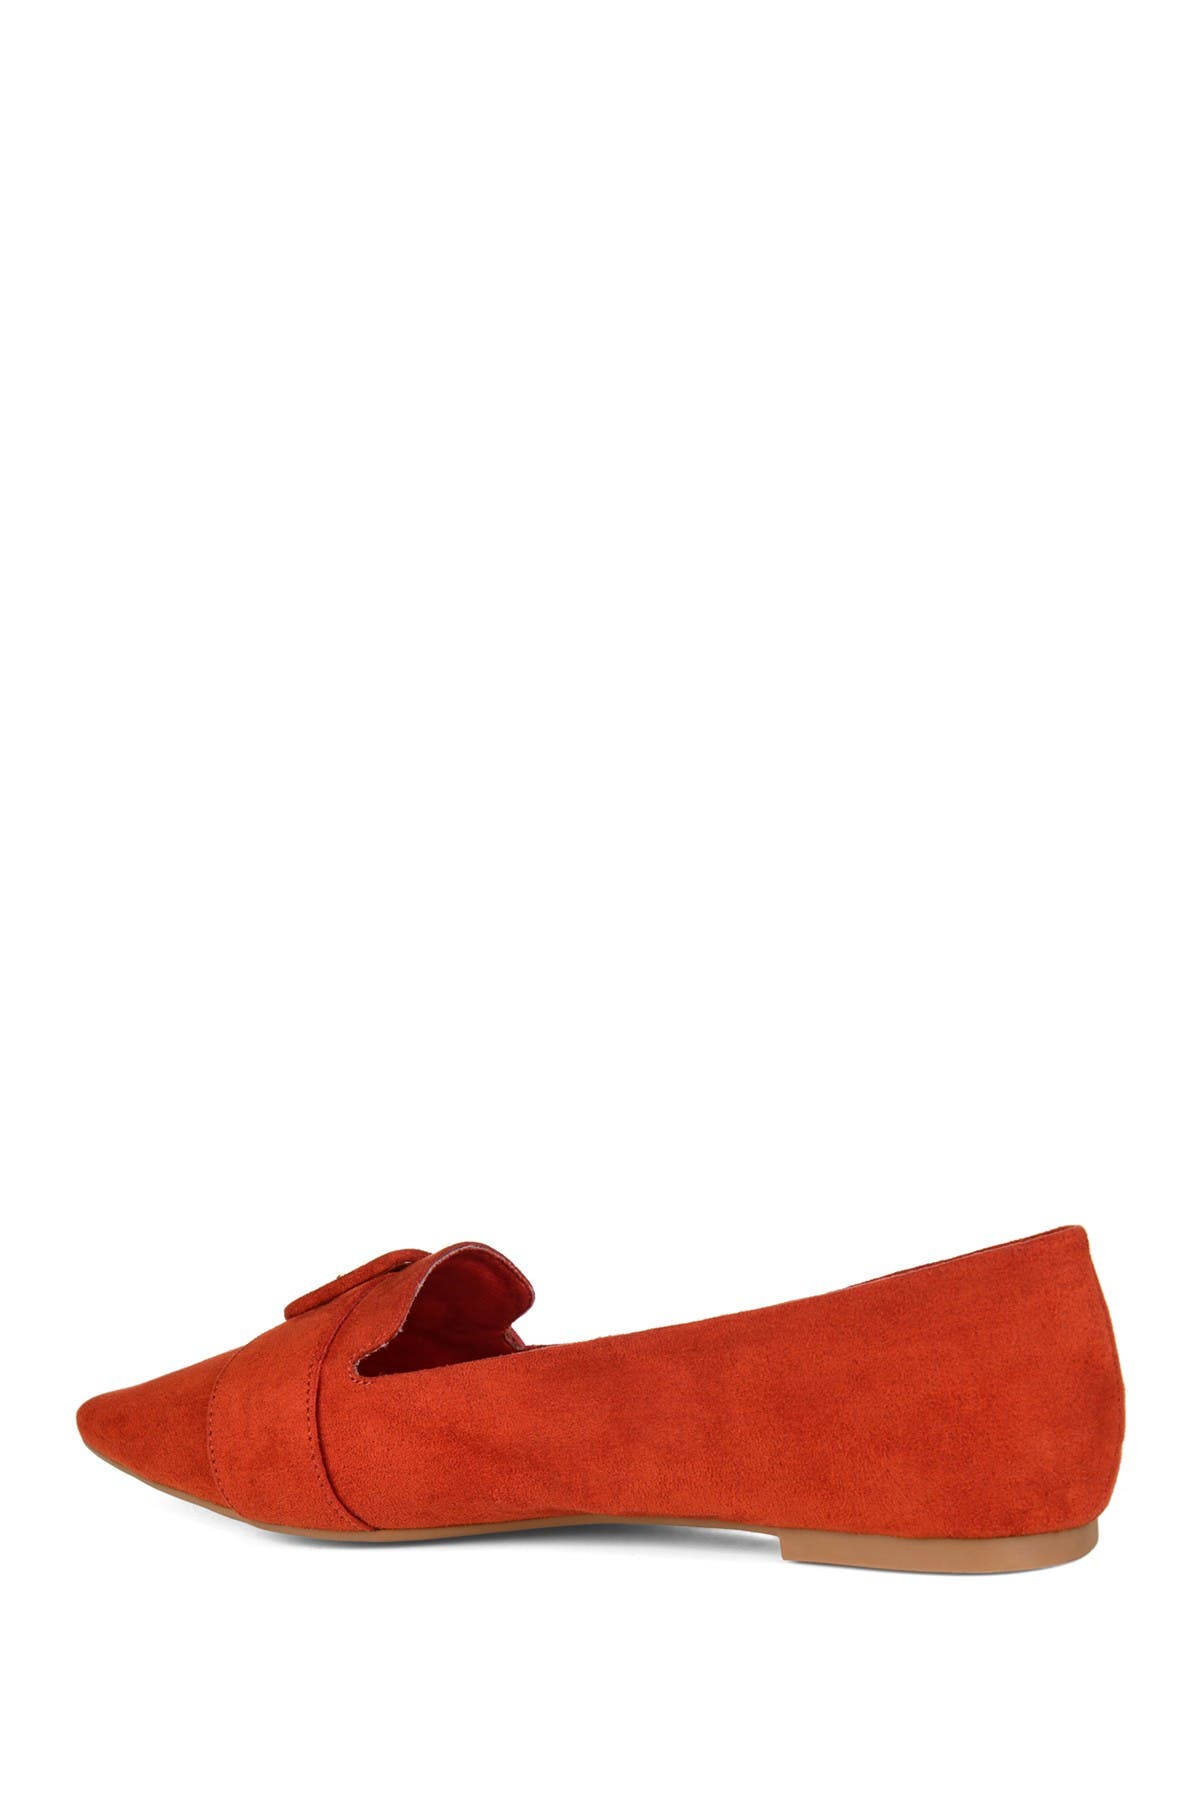 Journee Collection Audrey Buckle Flat In Bright Red